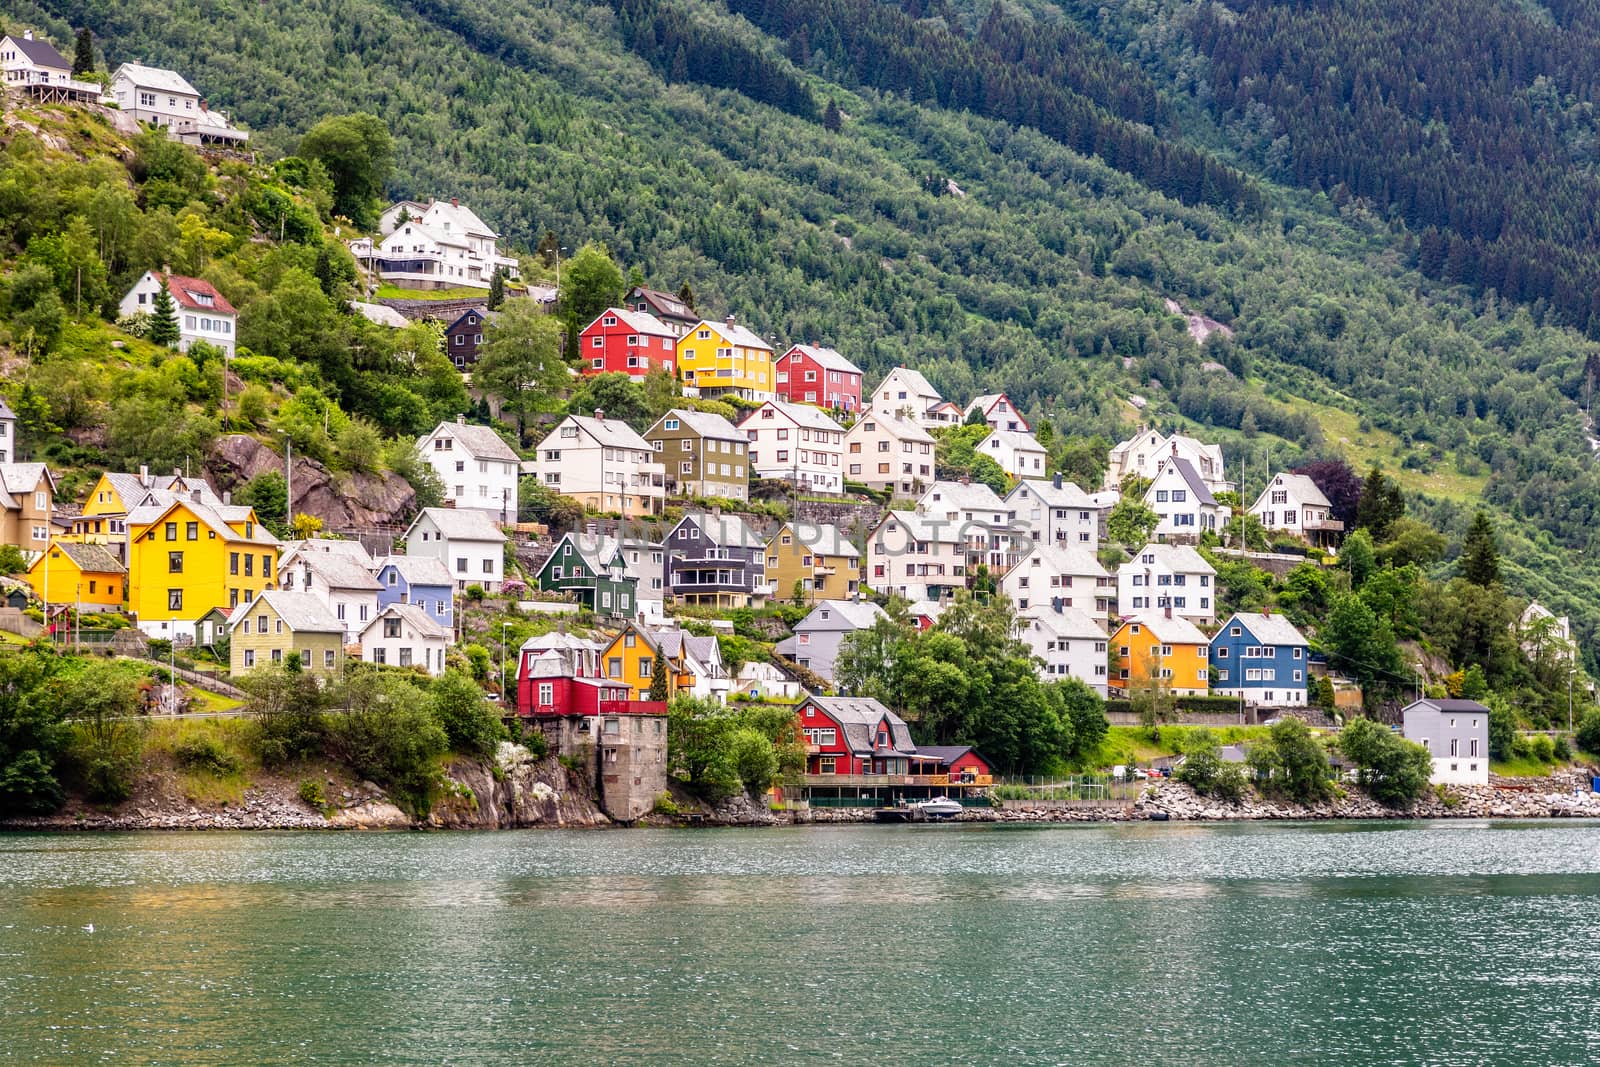 Colorful norwegian residential houses on the hill of Sorfjord, Odda, Hordaland county, Norway